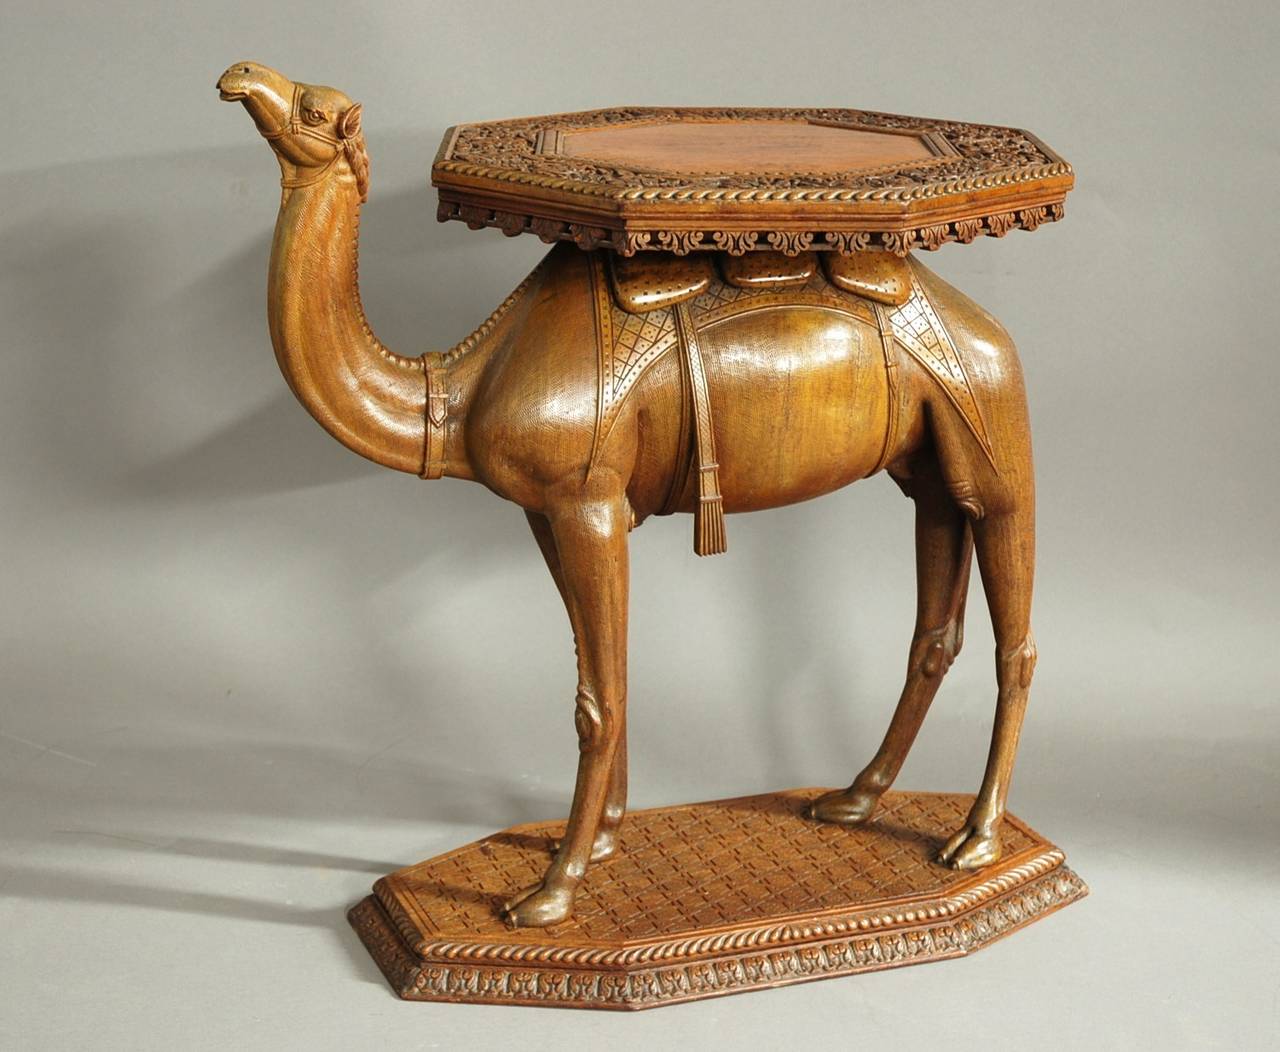 A late 19th-early 20th century, Anglo-Indian hardwood camel table of superb quality and good patina, possibly from the Gujarat region of India. 

This table consists of an octagonal top, the central section surrounded by a profusely carved foliate